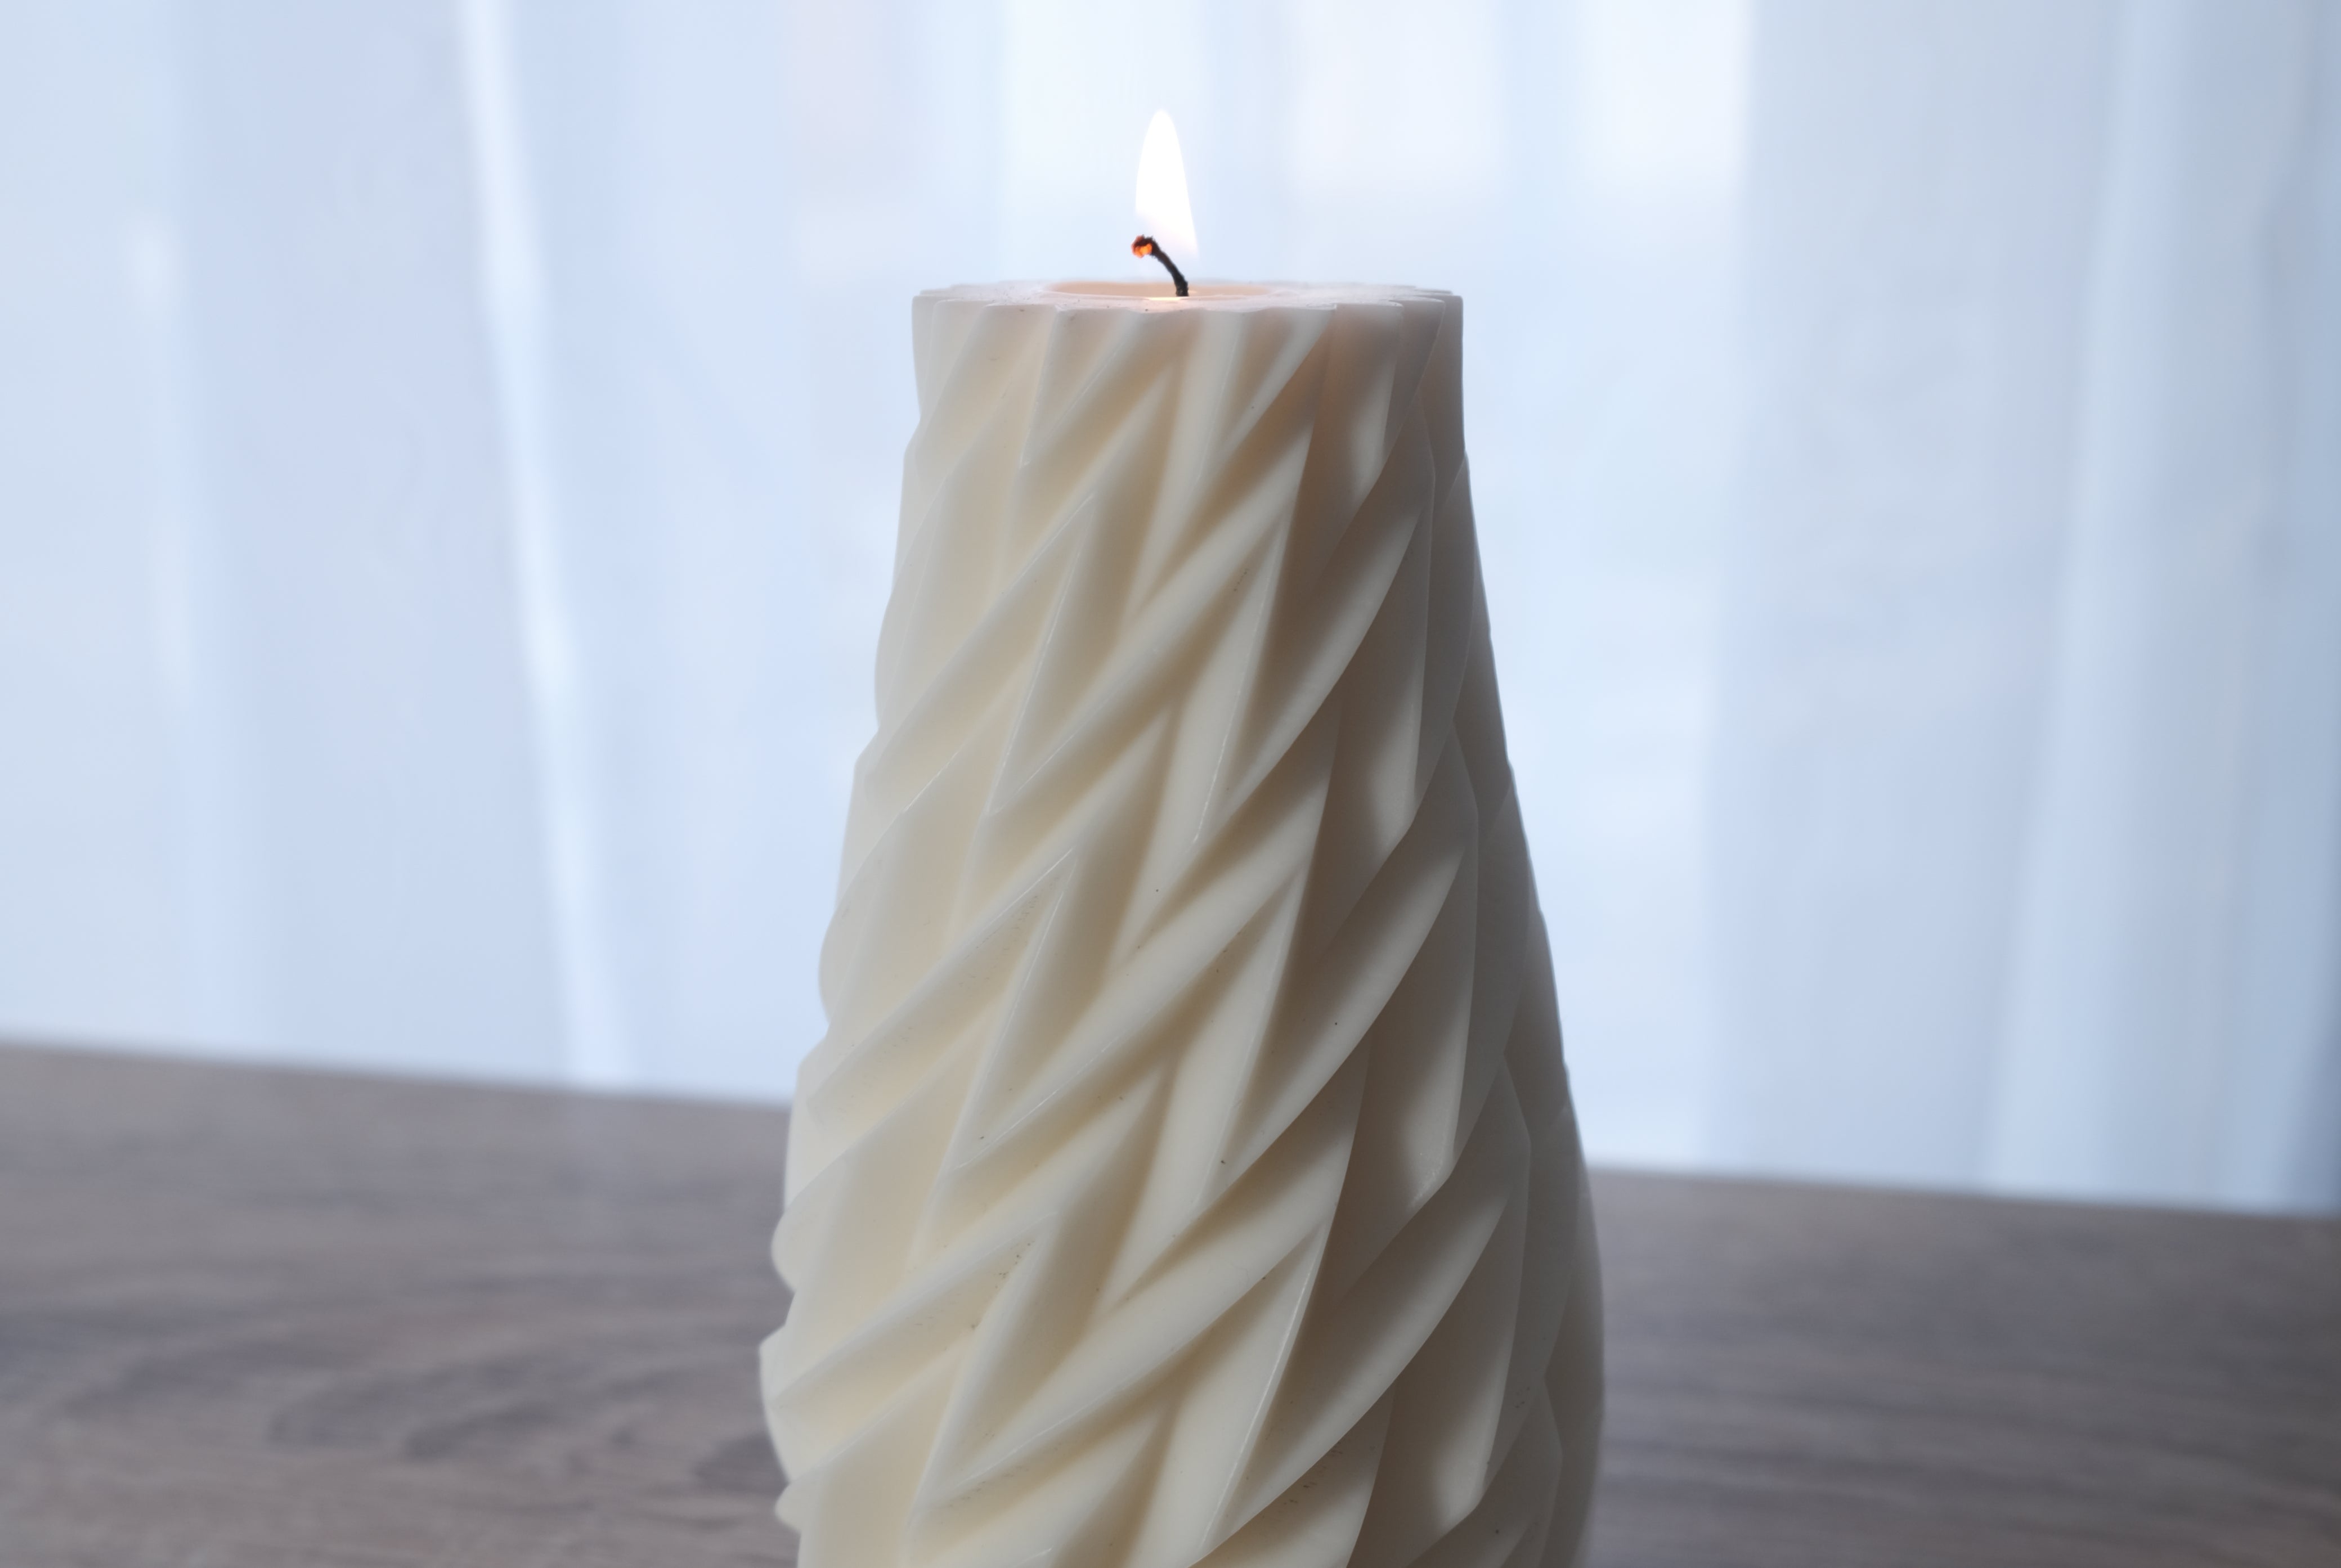 Ziggy Candle Mould 4 - Silicone Mould, Mold for DIY Candles. Created using candle making kit with cotton candle wicks and candle colour chips. Using soy wax for pillar candles. Sold by Myka Candles Moulds Australia